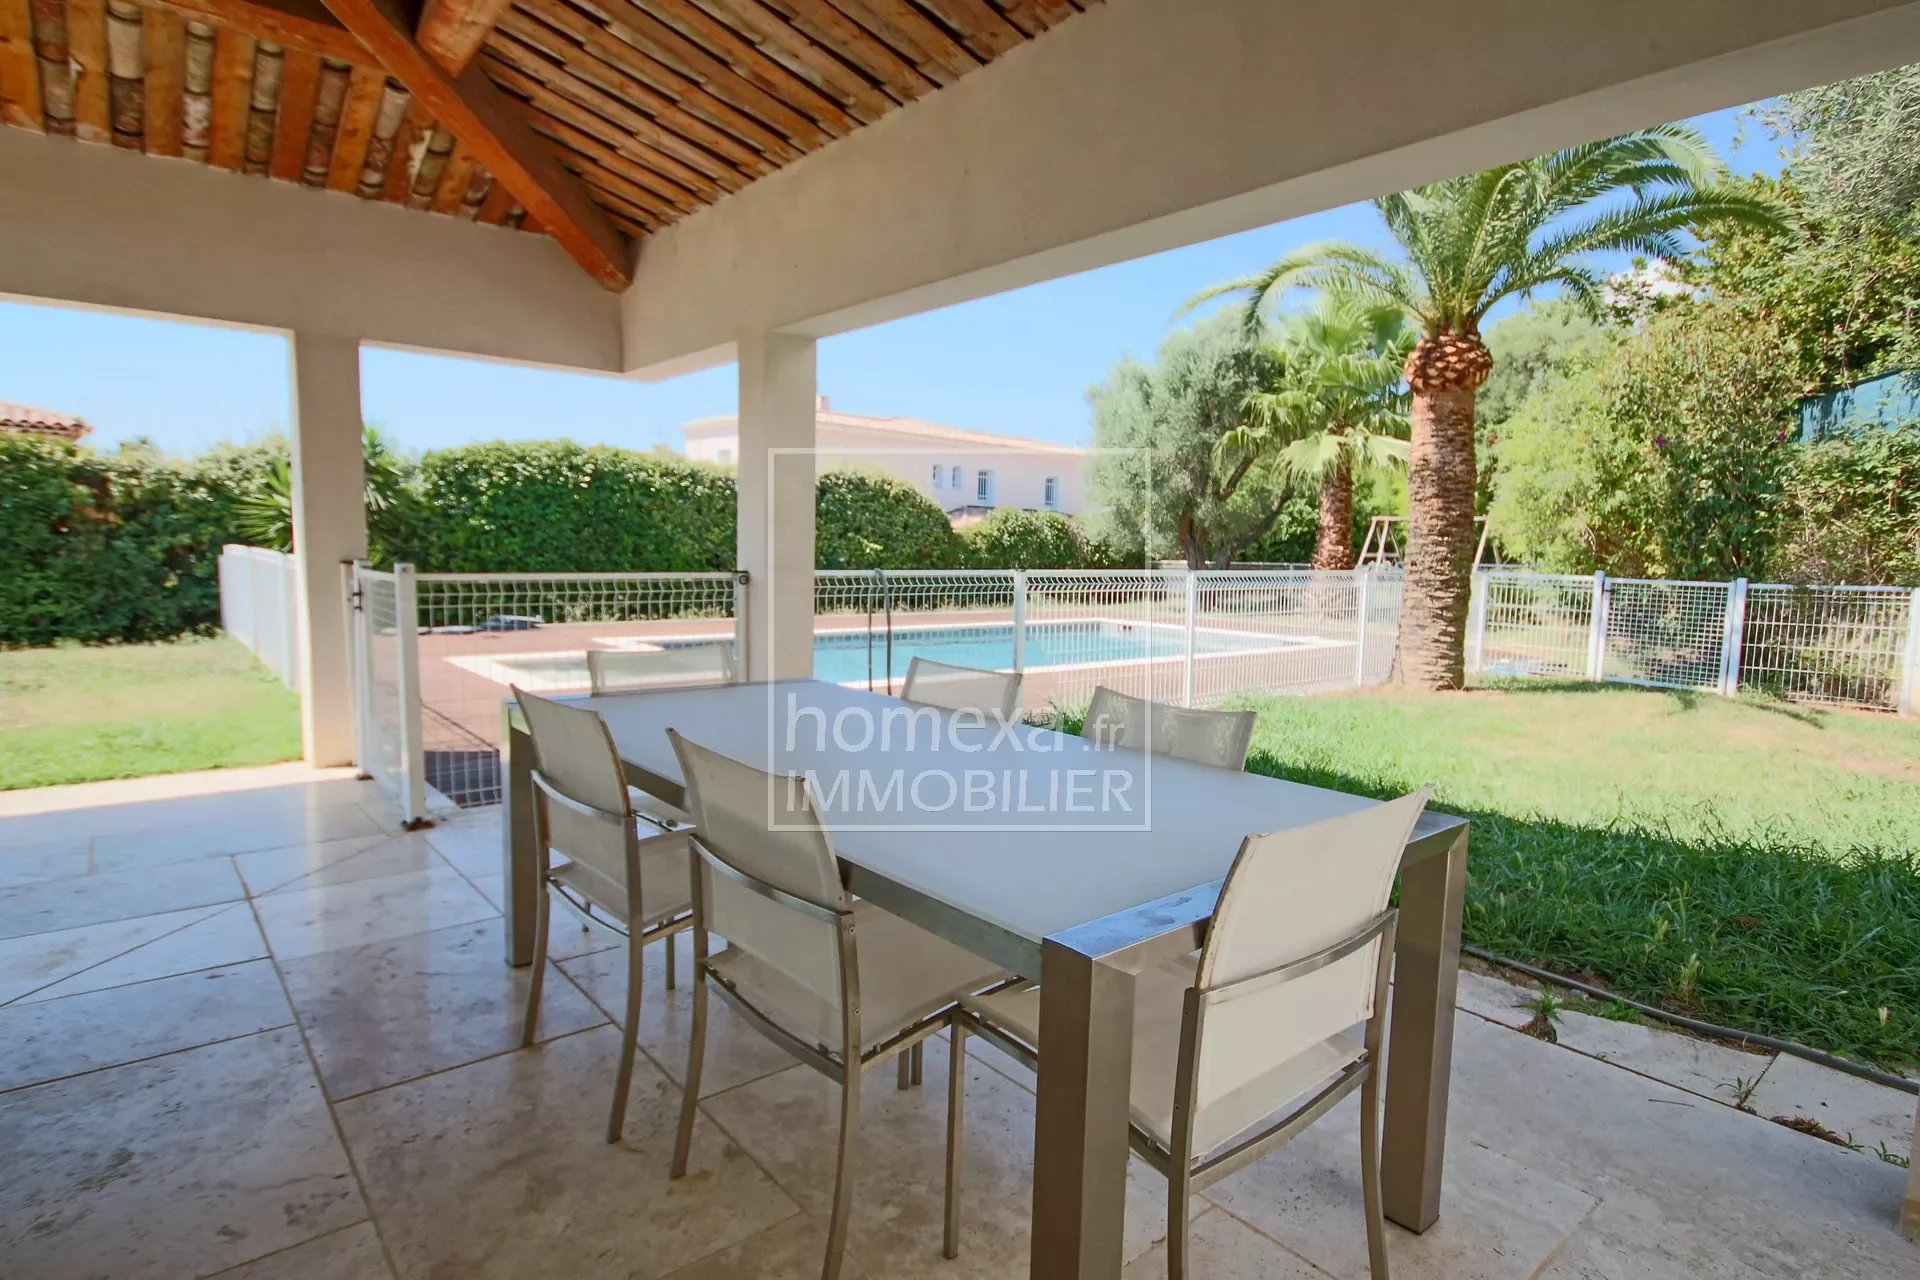 Villa for sale in Antibes Juan-les-Pins : Covered terrace view